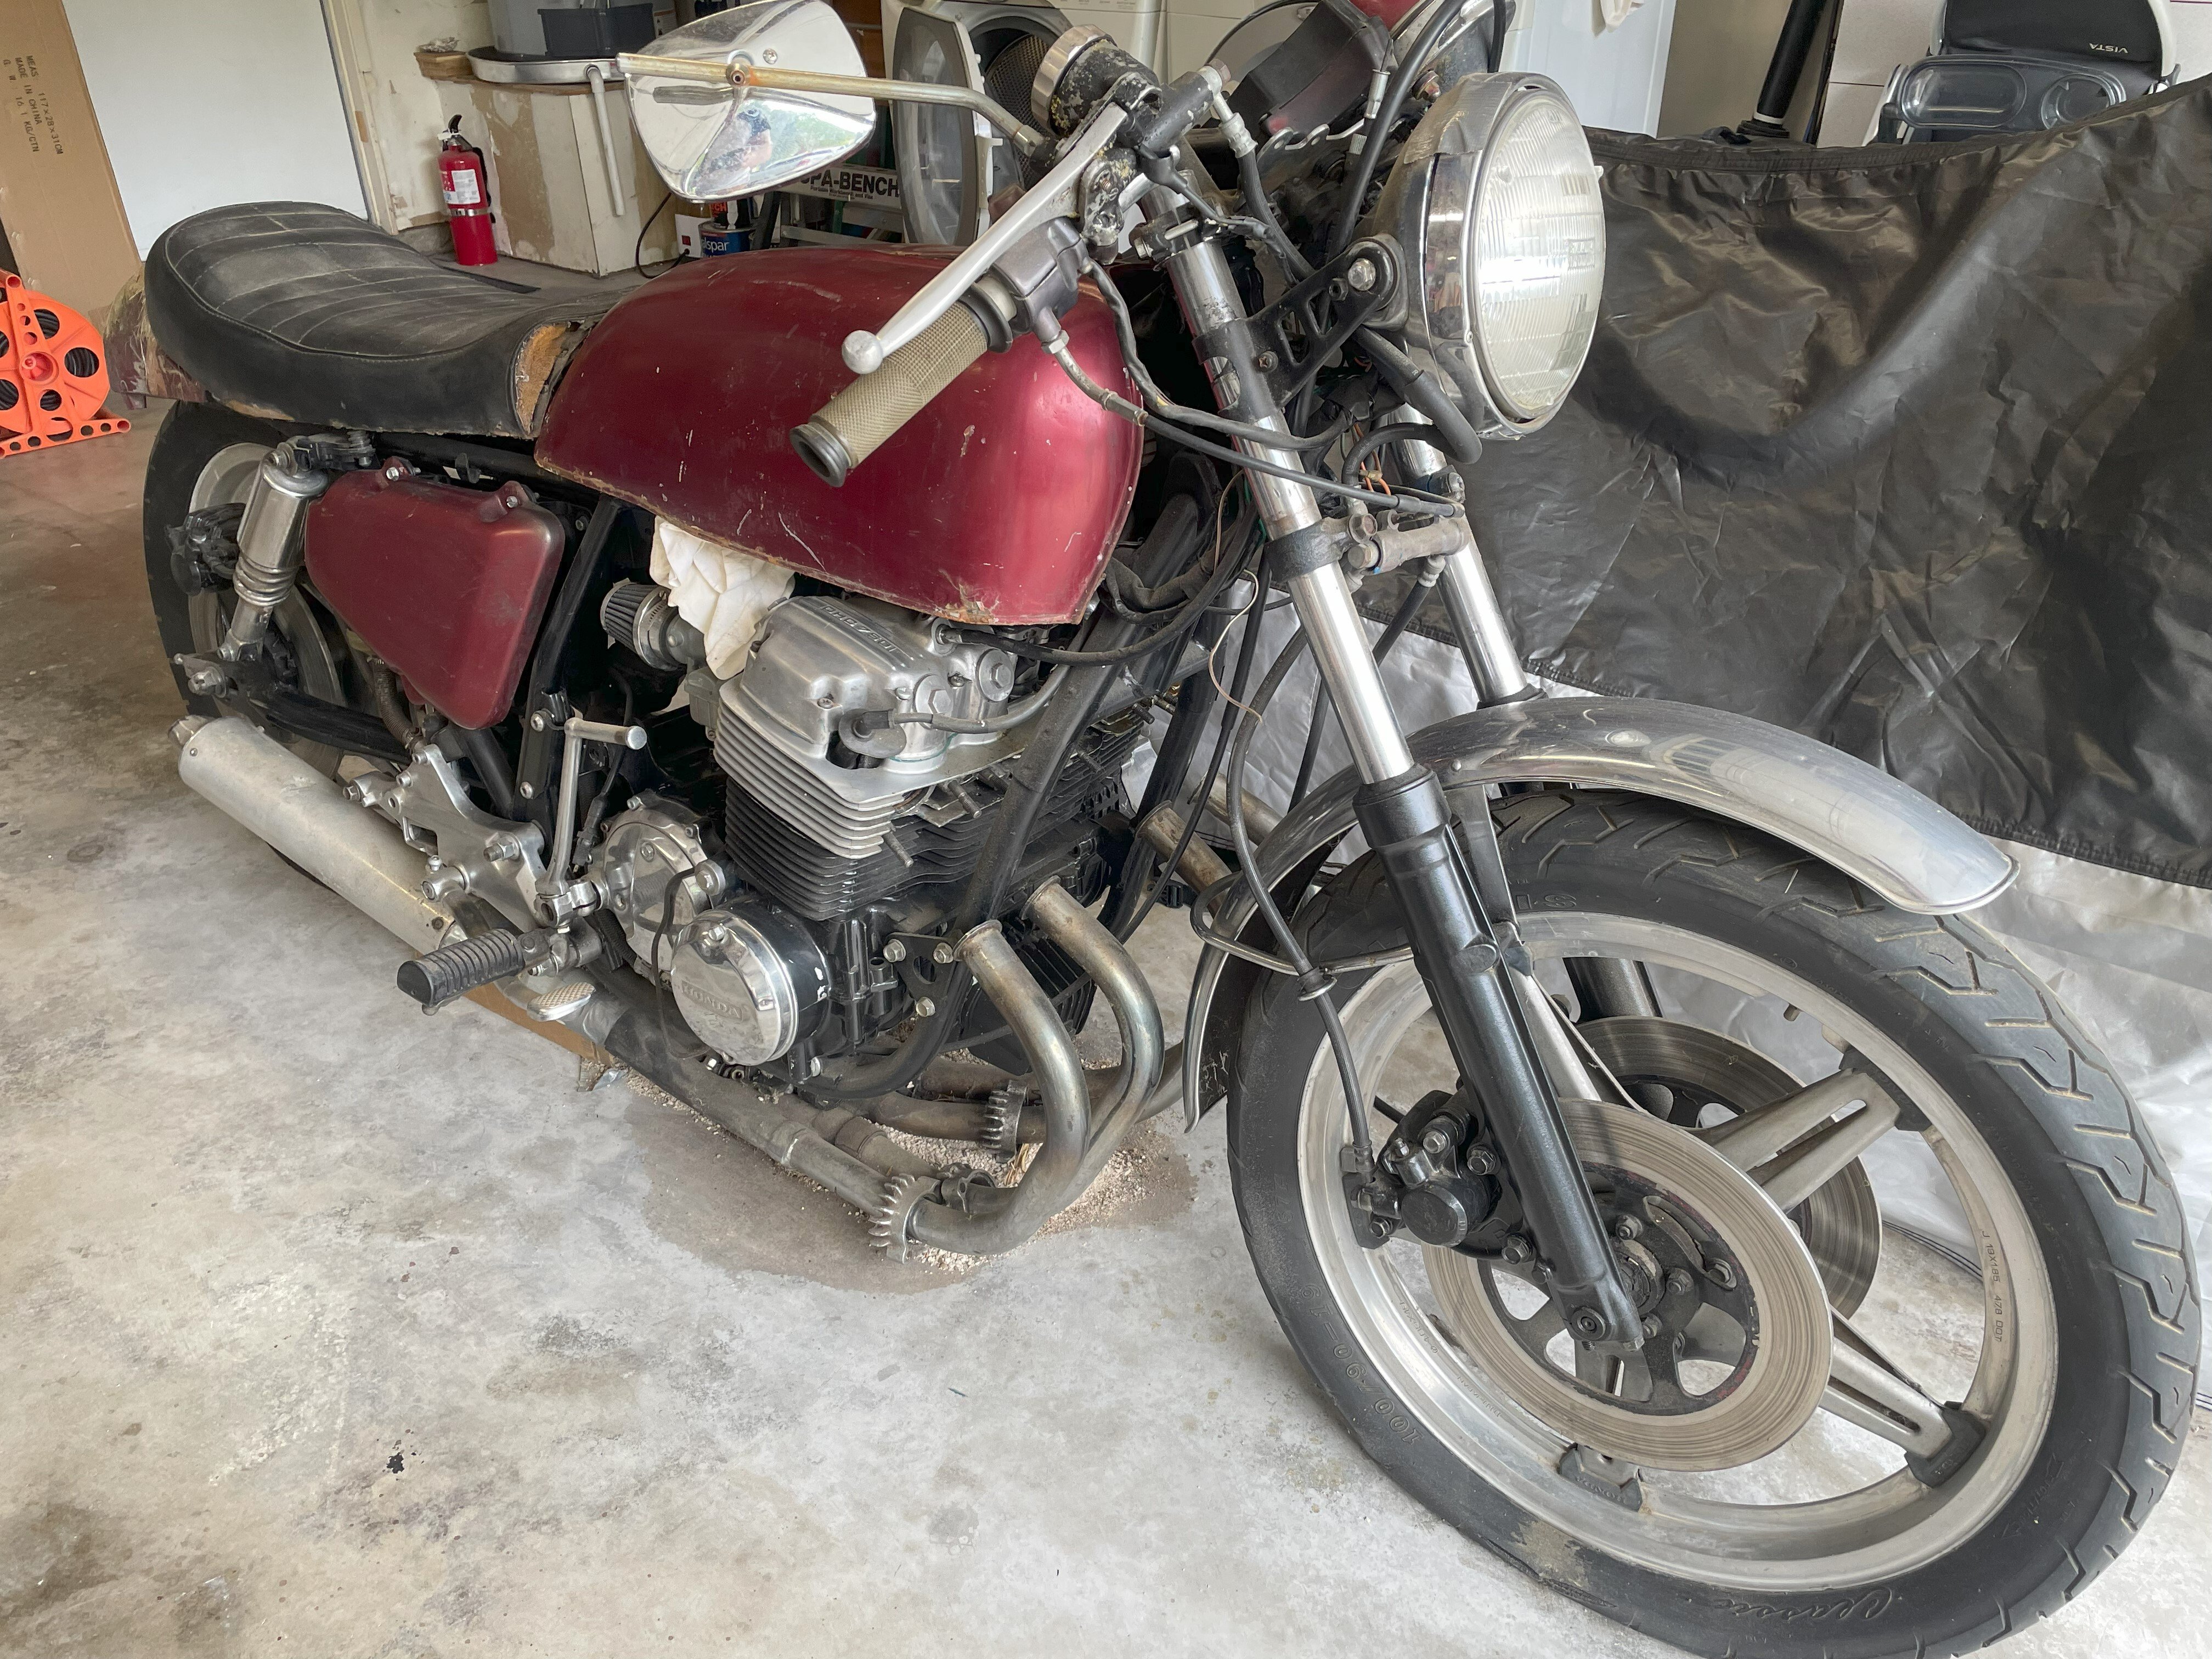 Cheap Motorcycles for Sale Under $1,000 - Motorcycles on Autotrader